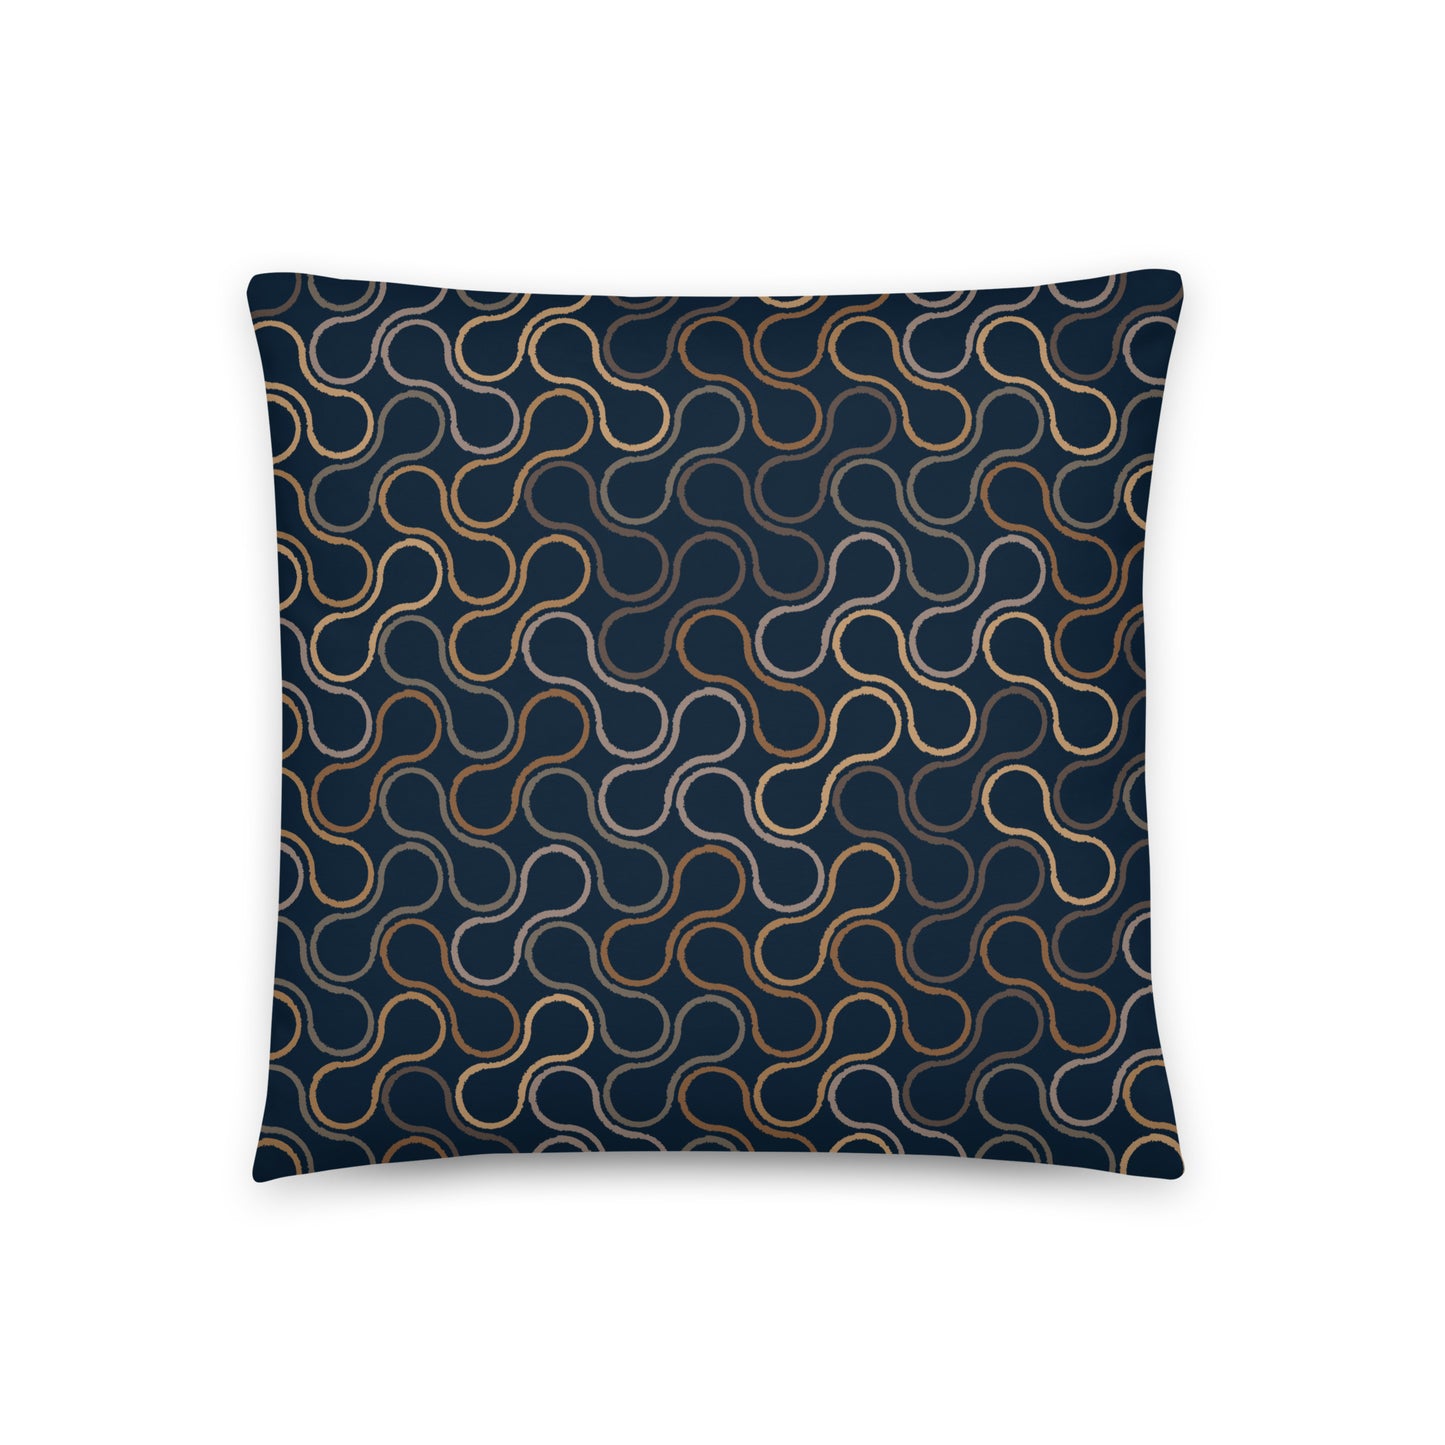 Elegant - Sustainably Made Pillows